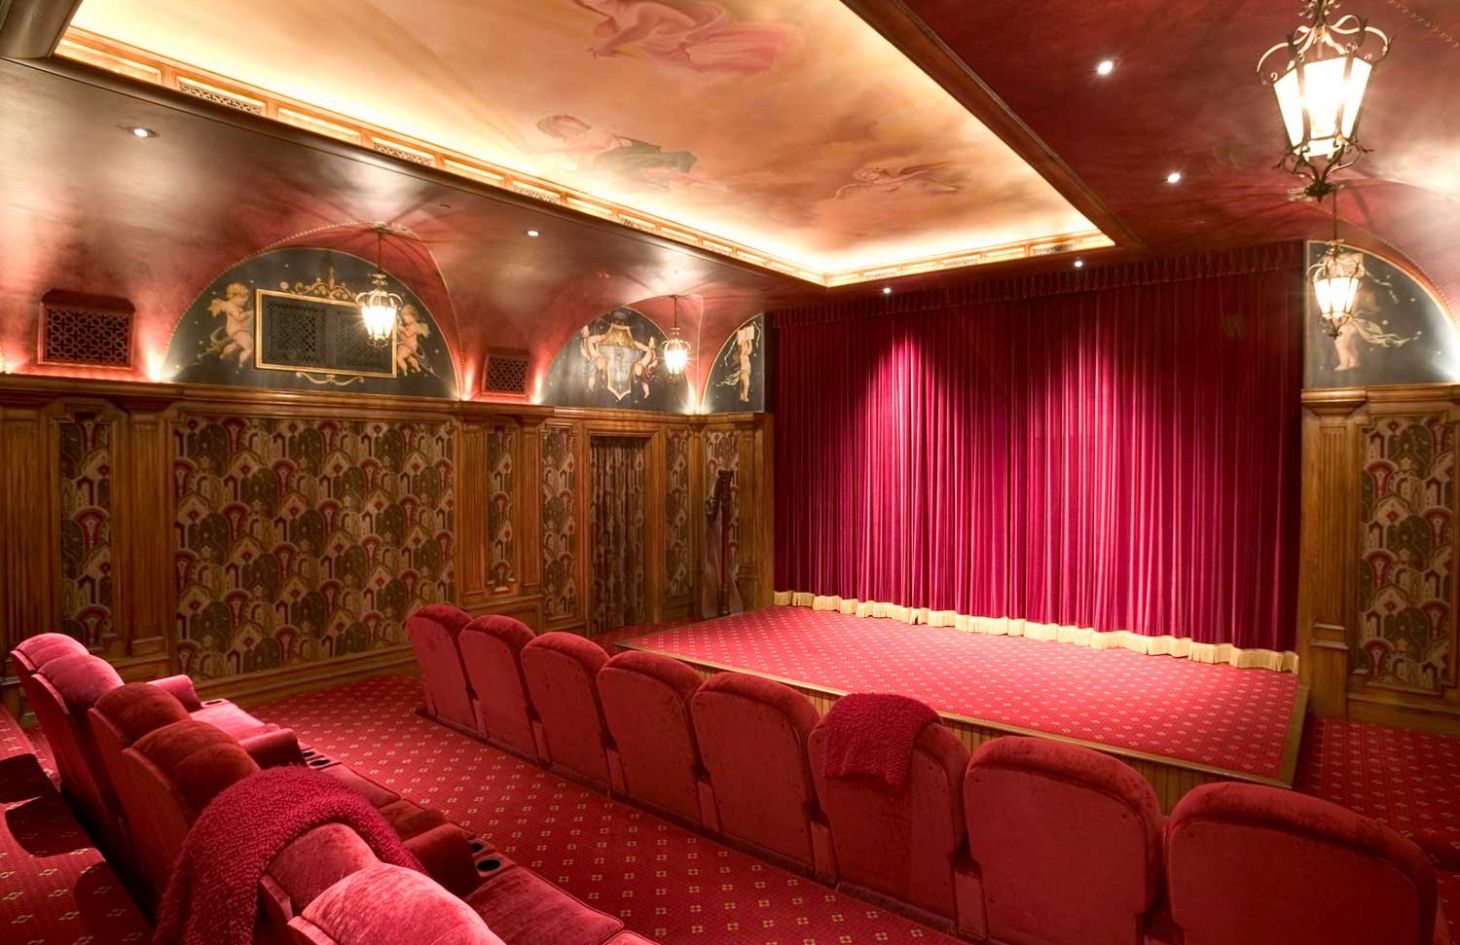 Screening Room, Mansion, Future Home, Theater